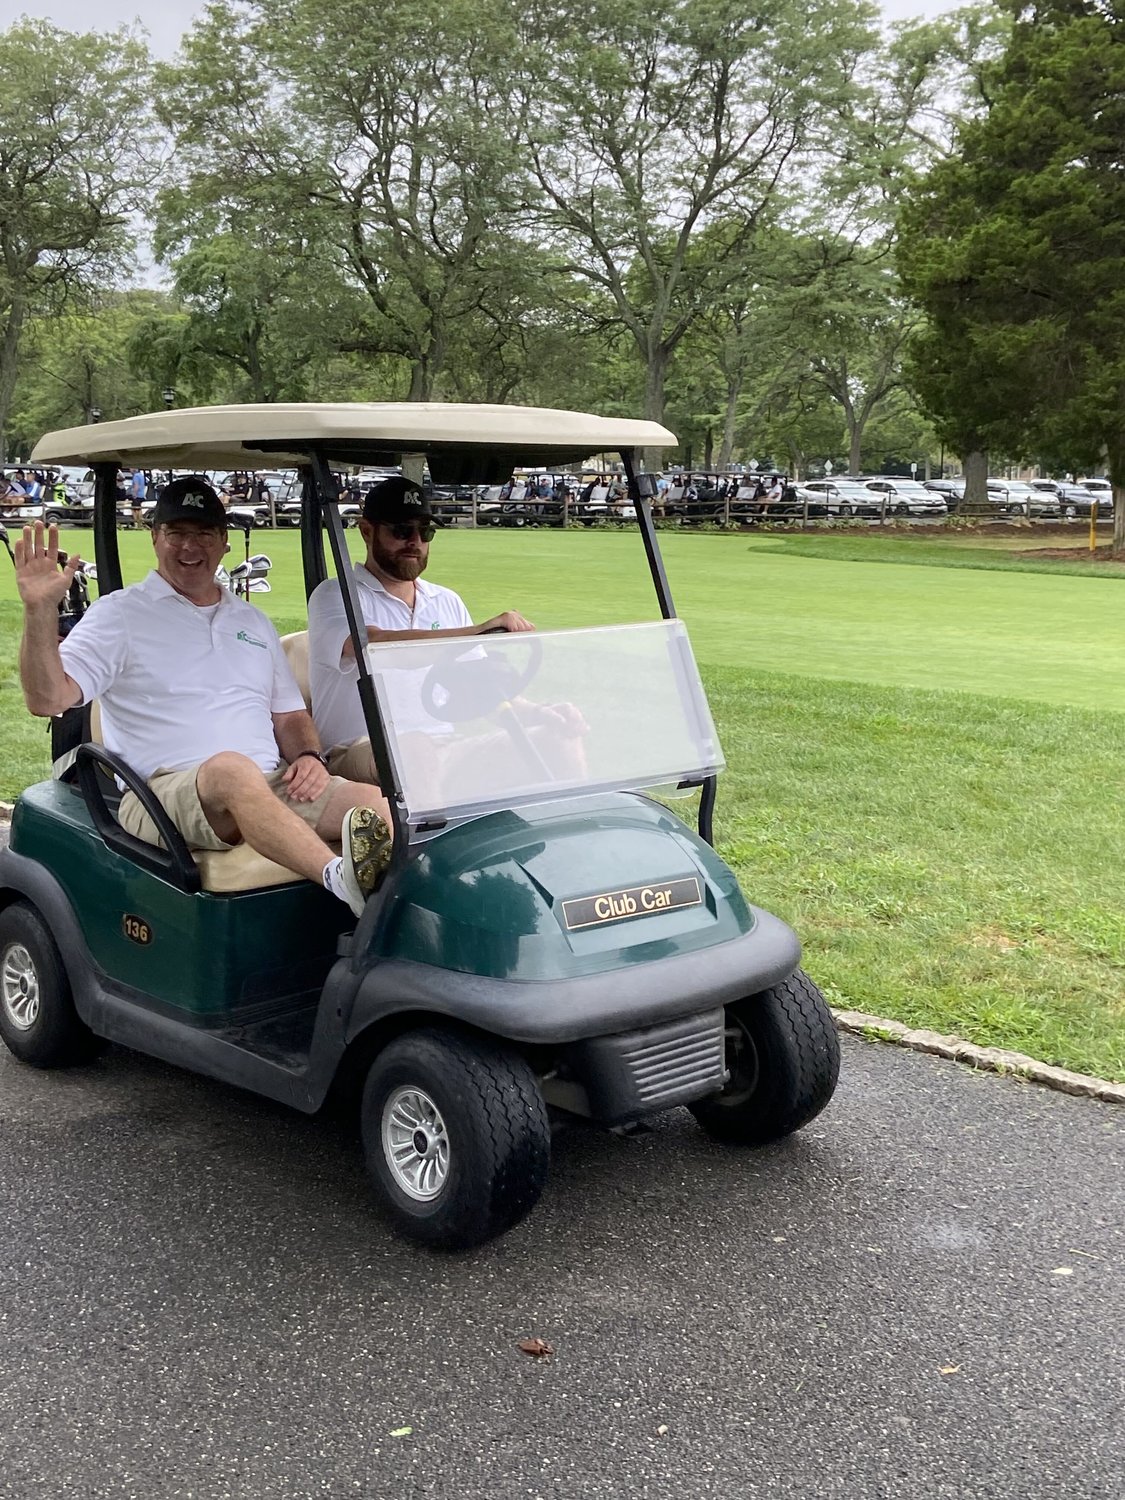 James Skinner Sr., far left, and his son, James, were ready to get their swings on at the annual Steven J. Eisman Memorial Golf Outing.